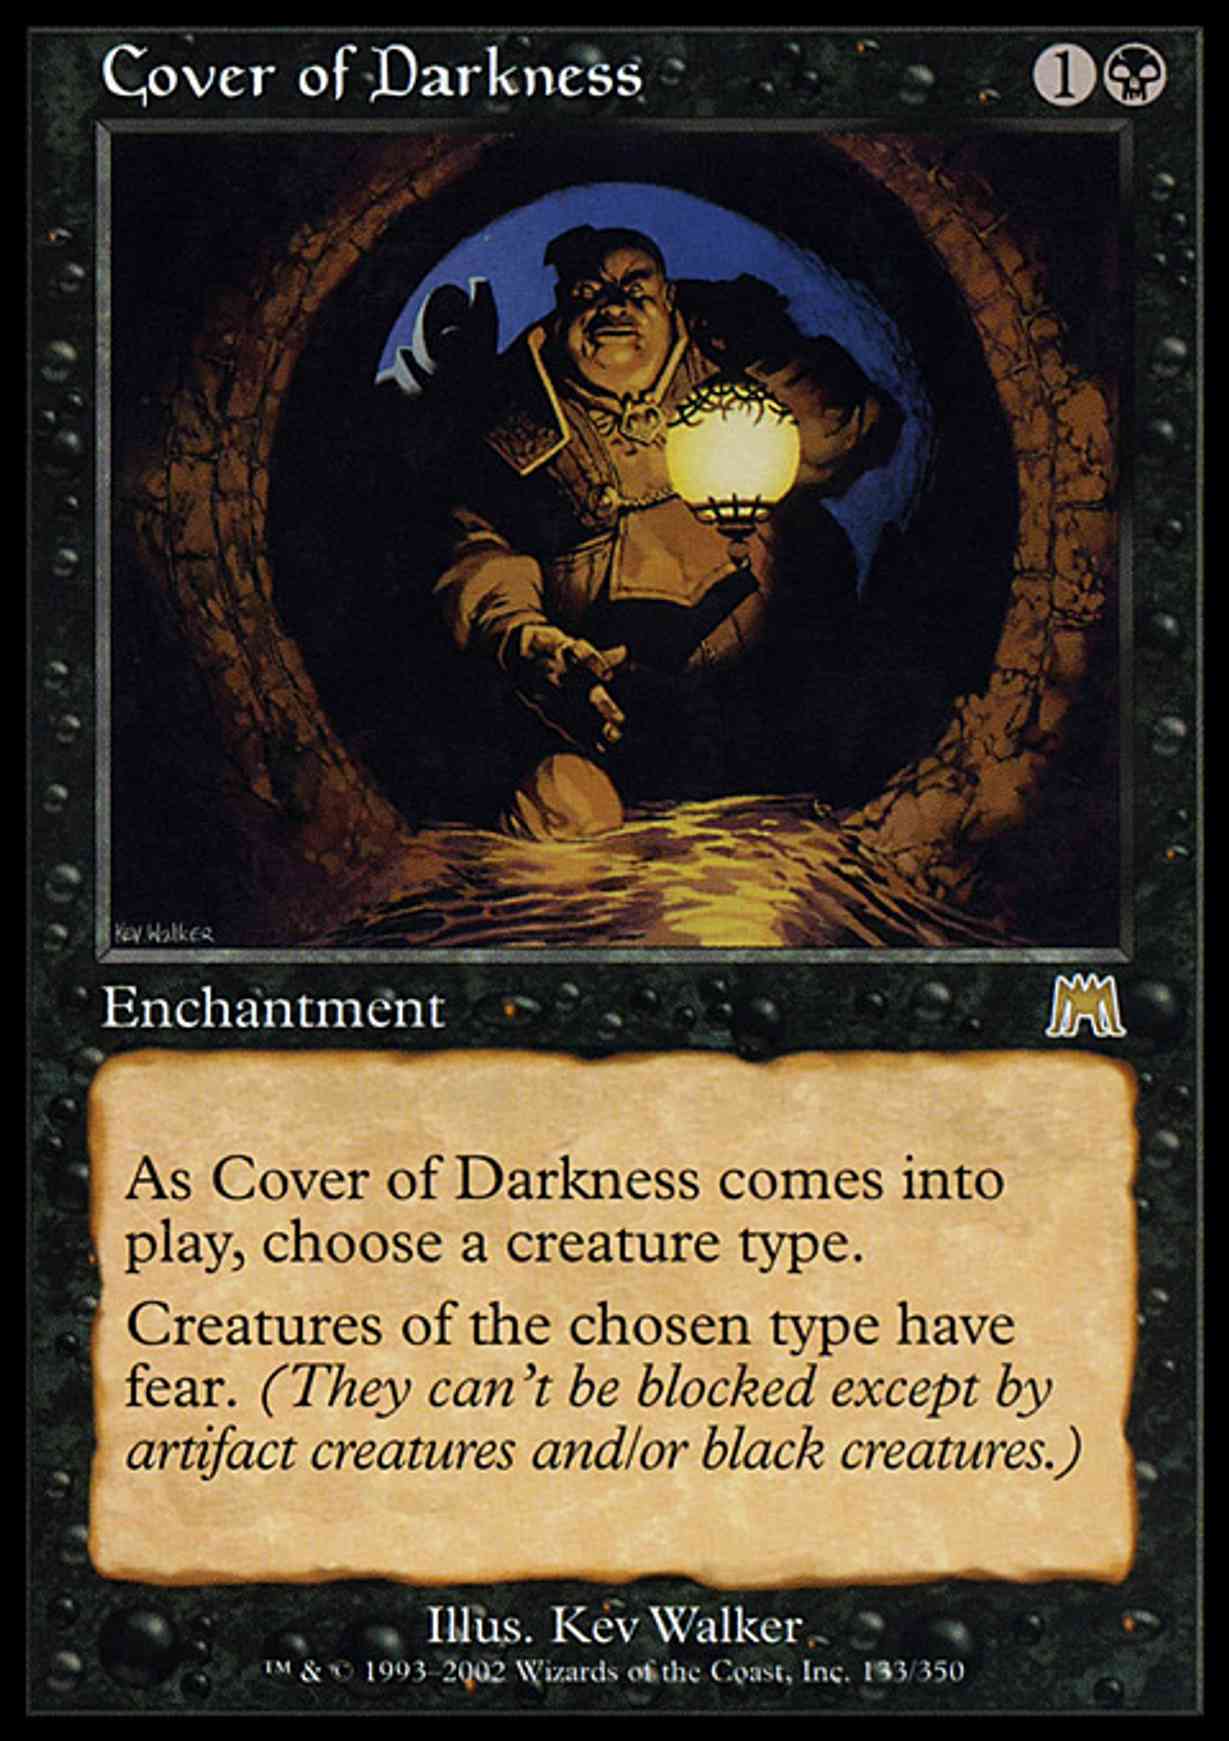 Cover of Darkness magic card front